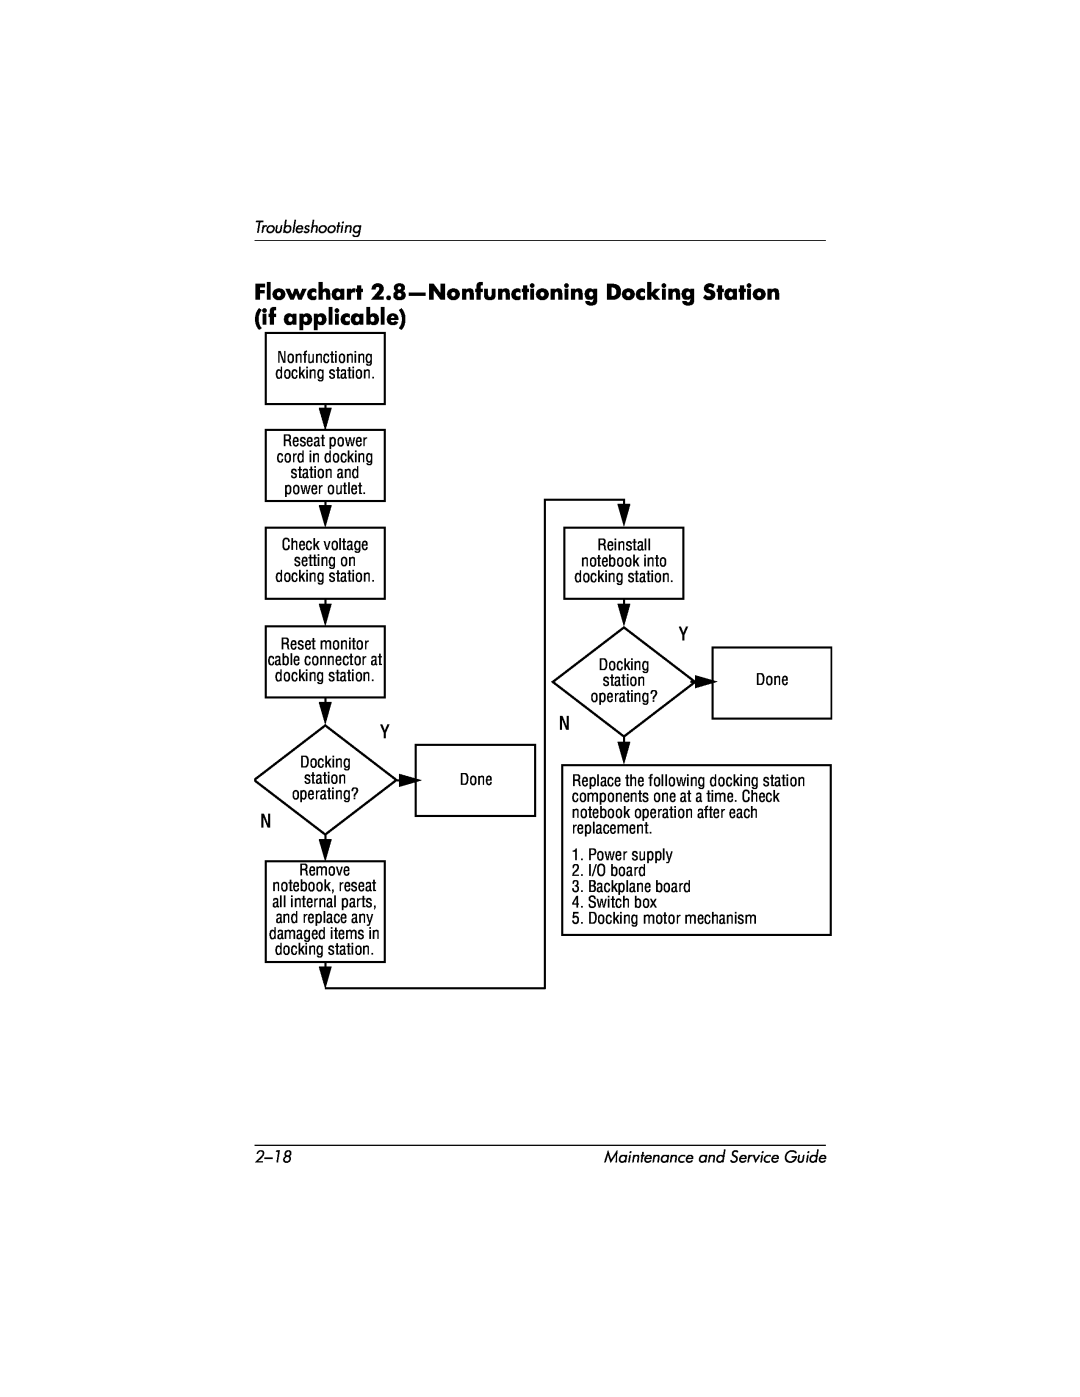 HP X1000, nx7000 manual Flowchart 2.8-Nonfunctioning Docking Station if applicable, Troubleshooting, 2-18 